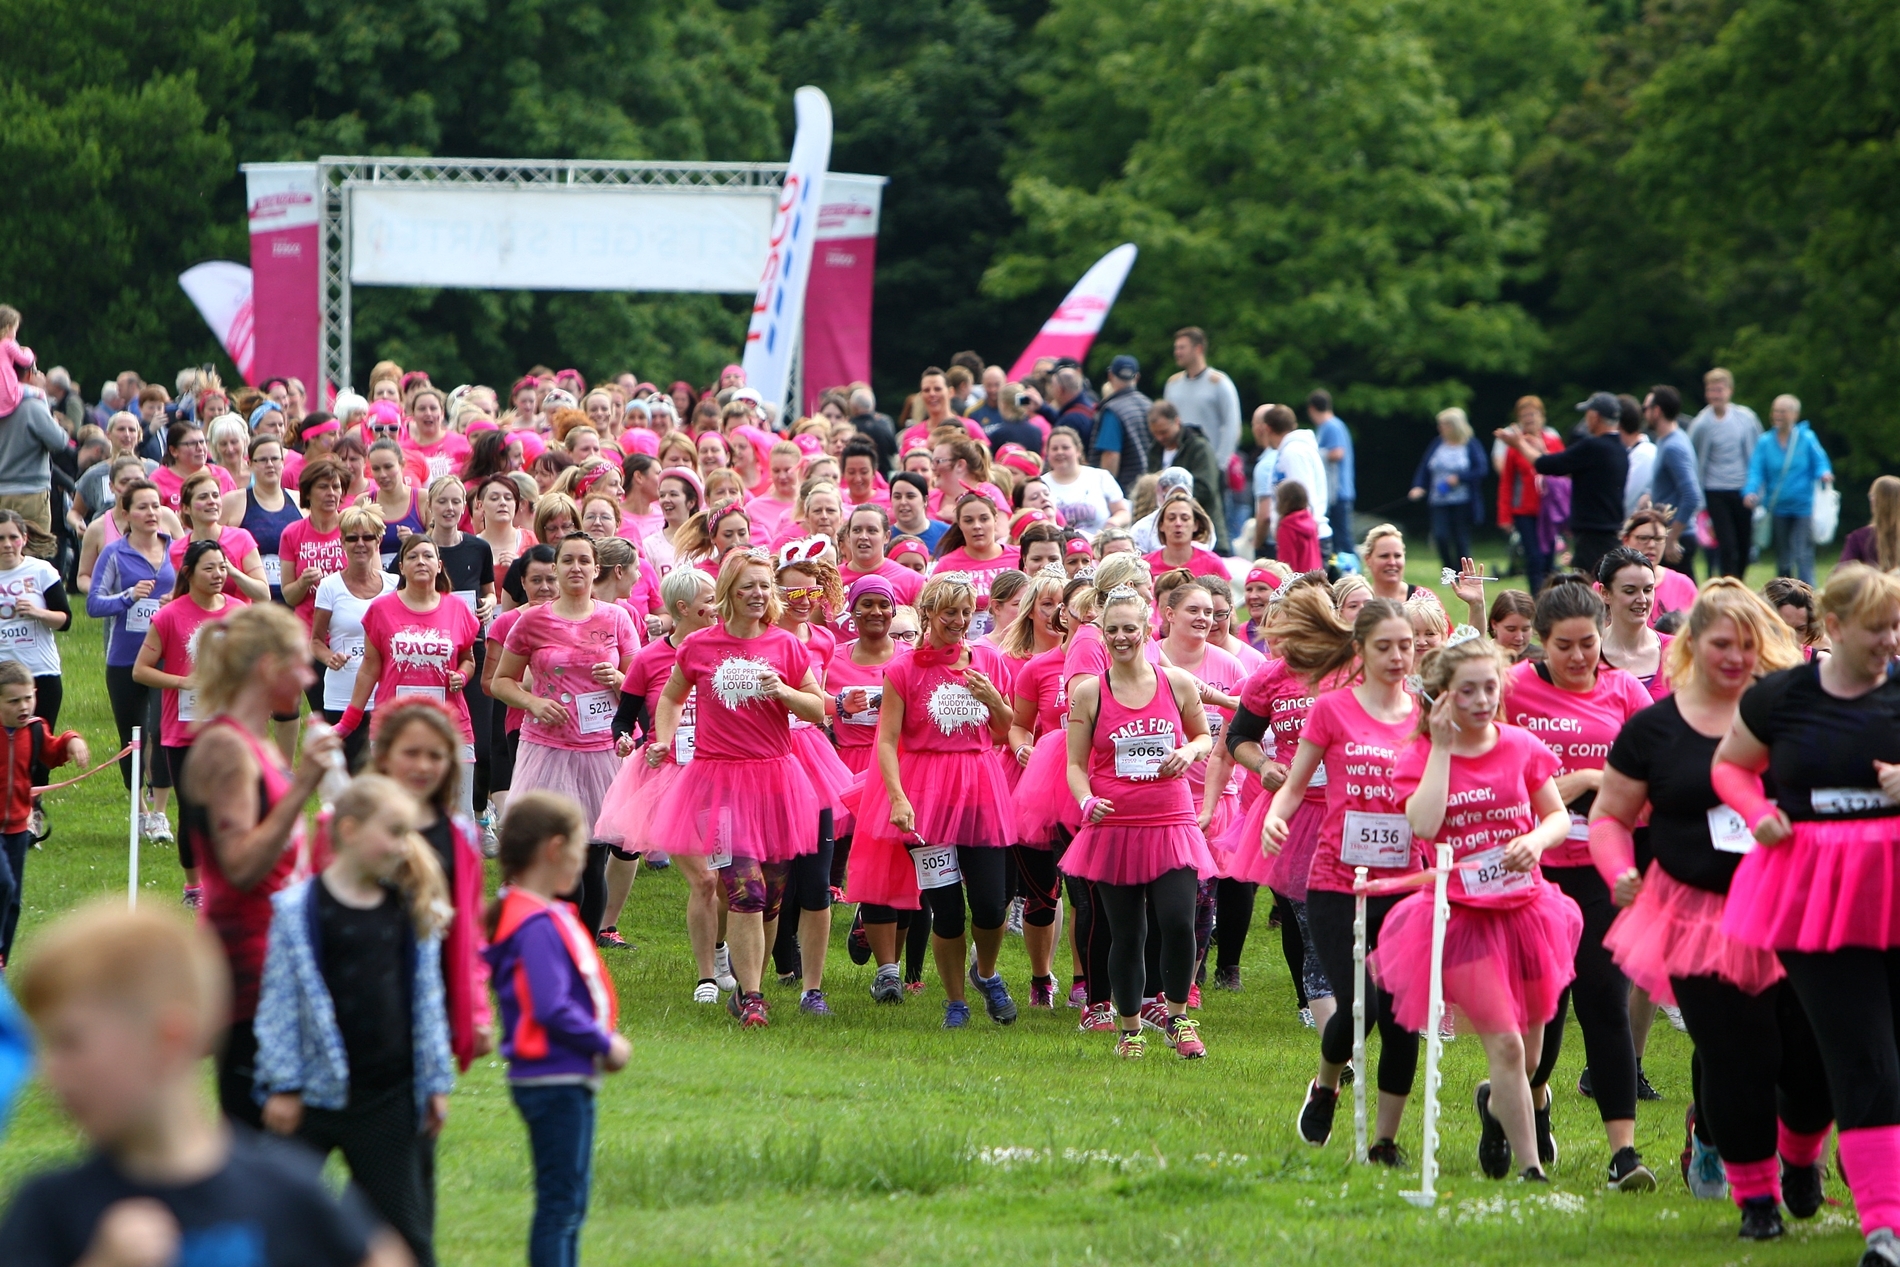 Camperdown Park is turned into a sea of pink during the annual Race for Life Dundee and Pretty Mudder events.